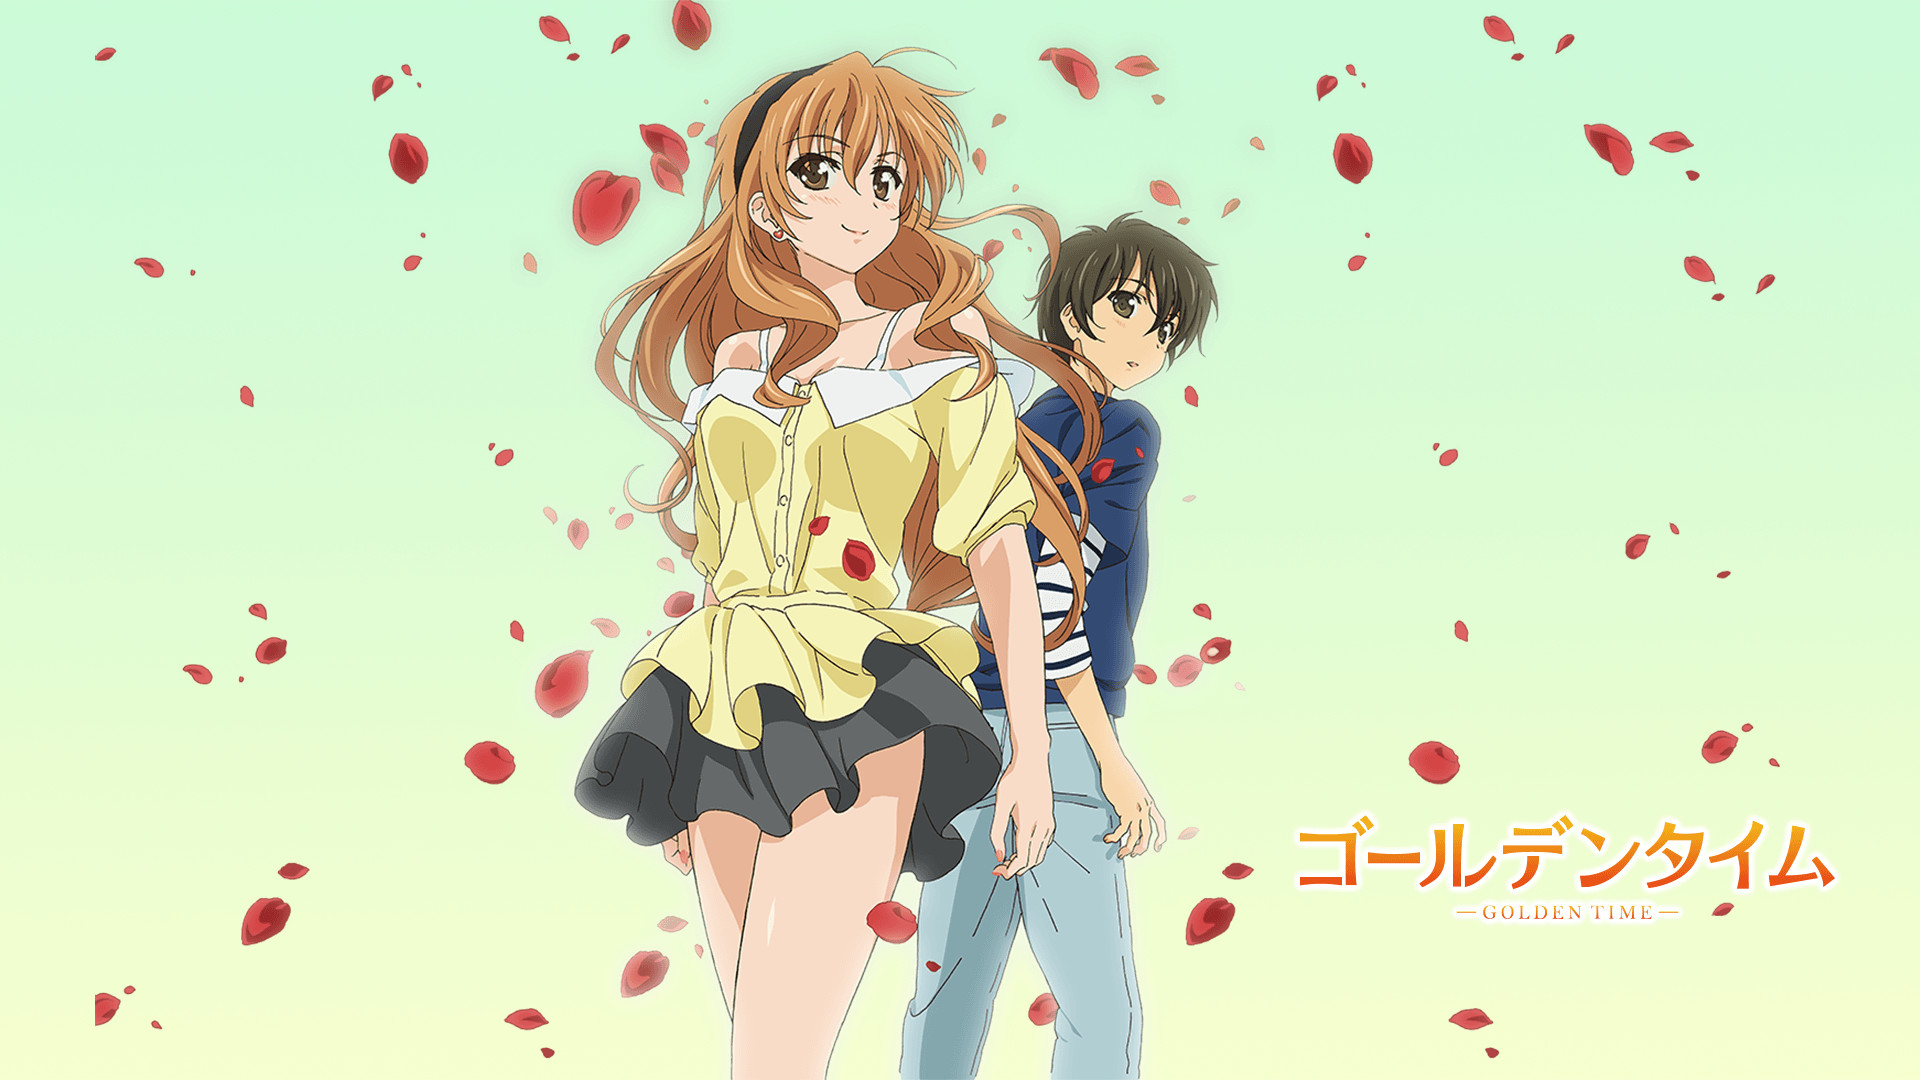 1920x1080 16 Golden Time HD Wallpapers | Backgrounds - Wallpaper Abyss